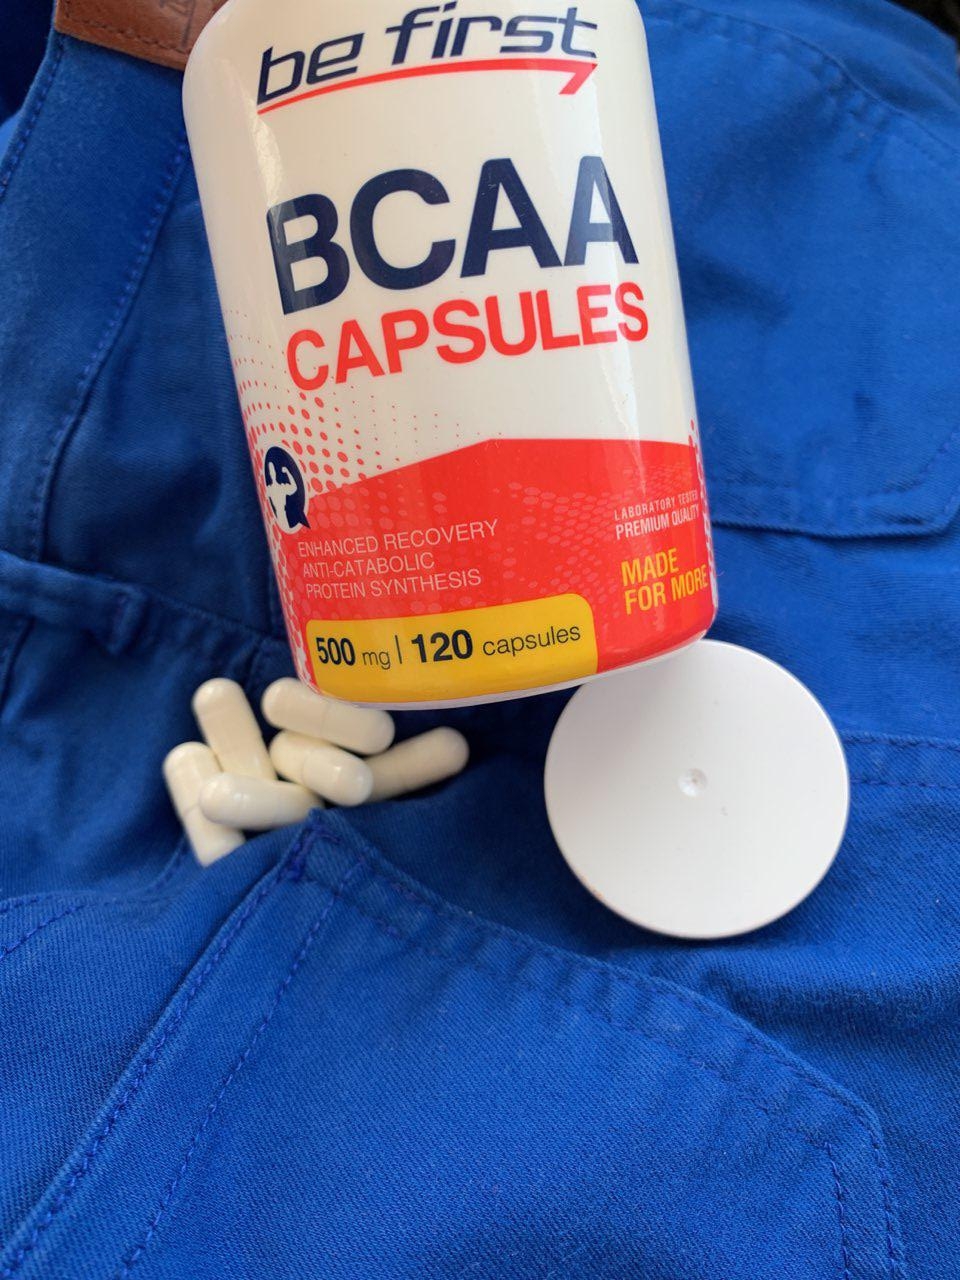 Be First BCAA Capsules 120 капсул - Сушка на этих капсулах